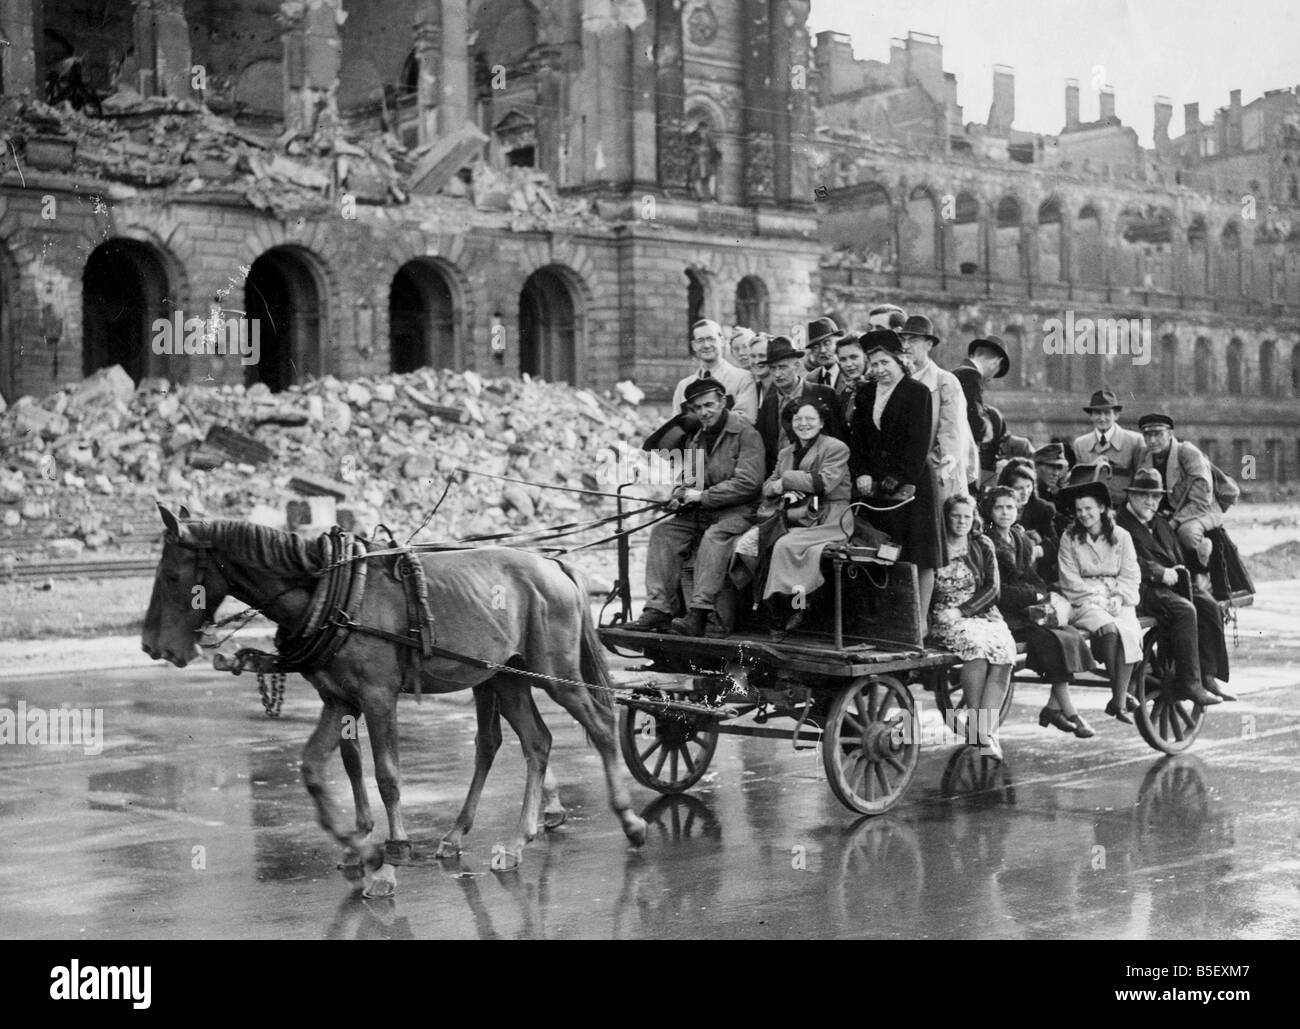 Britsh army units arrive in the German capital city of Berlin to take up their occupation positions in the Allied Zone. Local Berliners make their way home in a horse drawn cart with the ruins of the Engineering college behind them;July 1945 Stock Photo